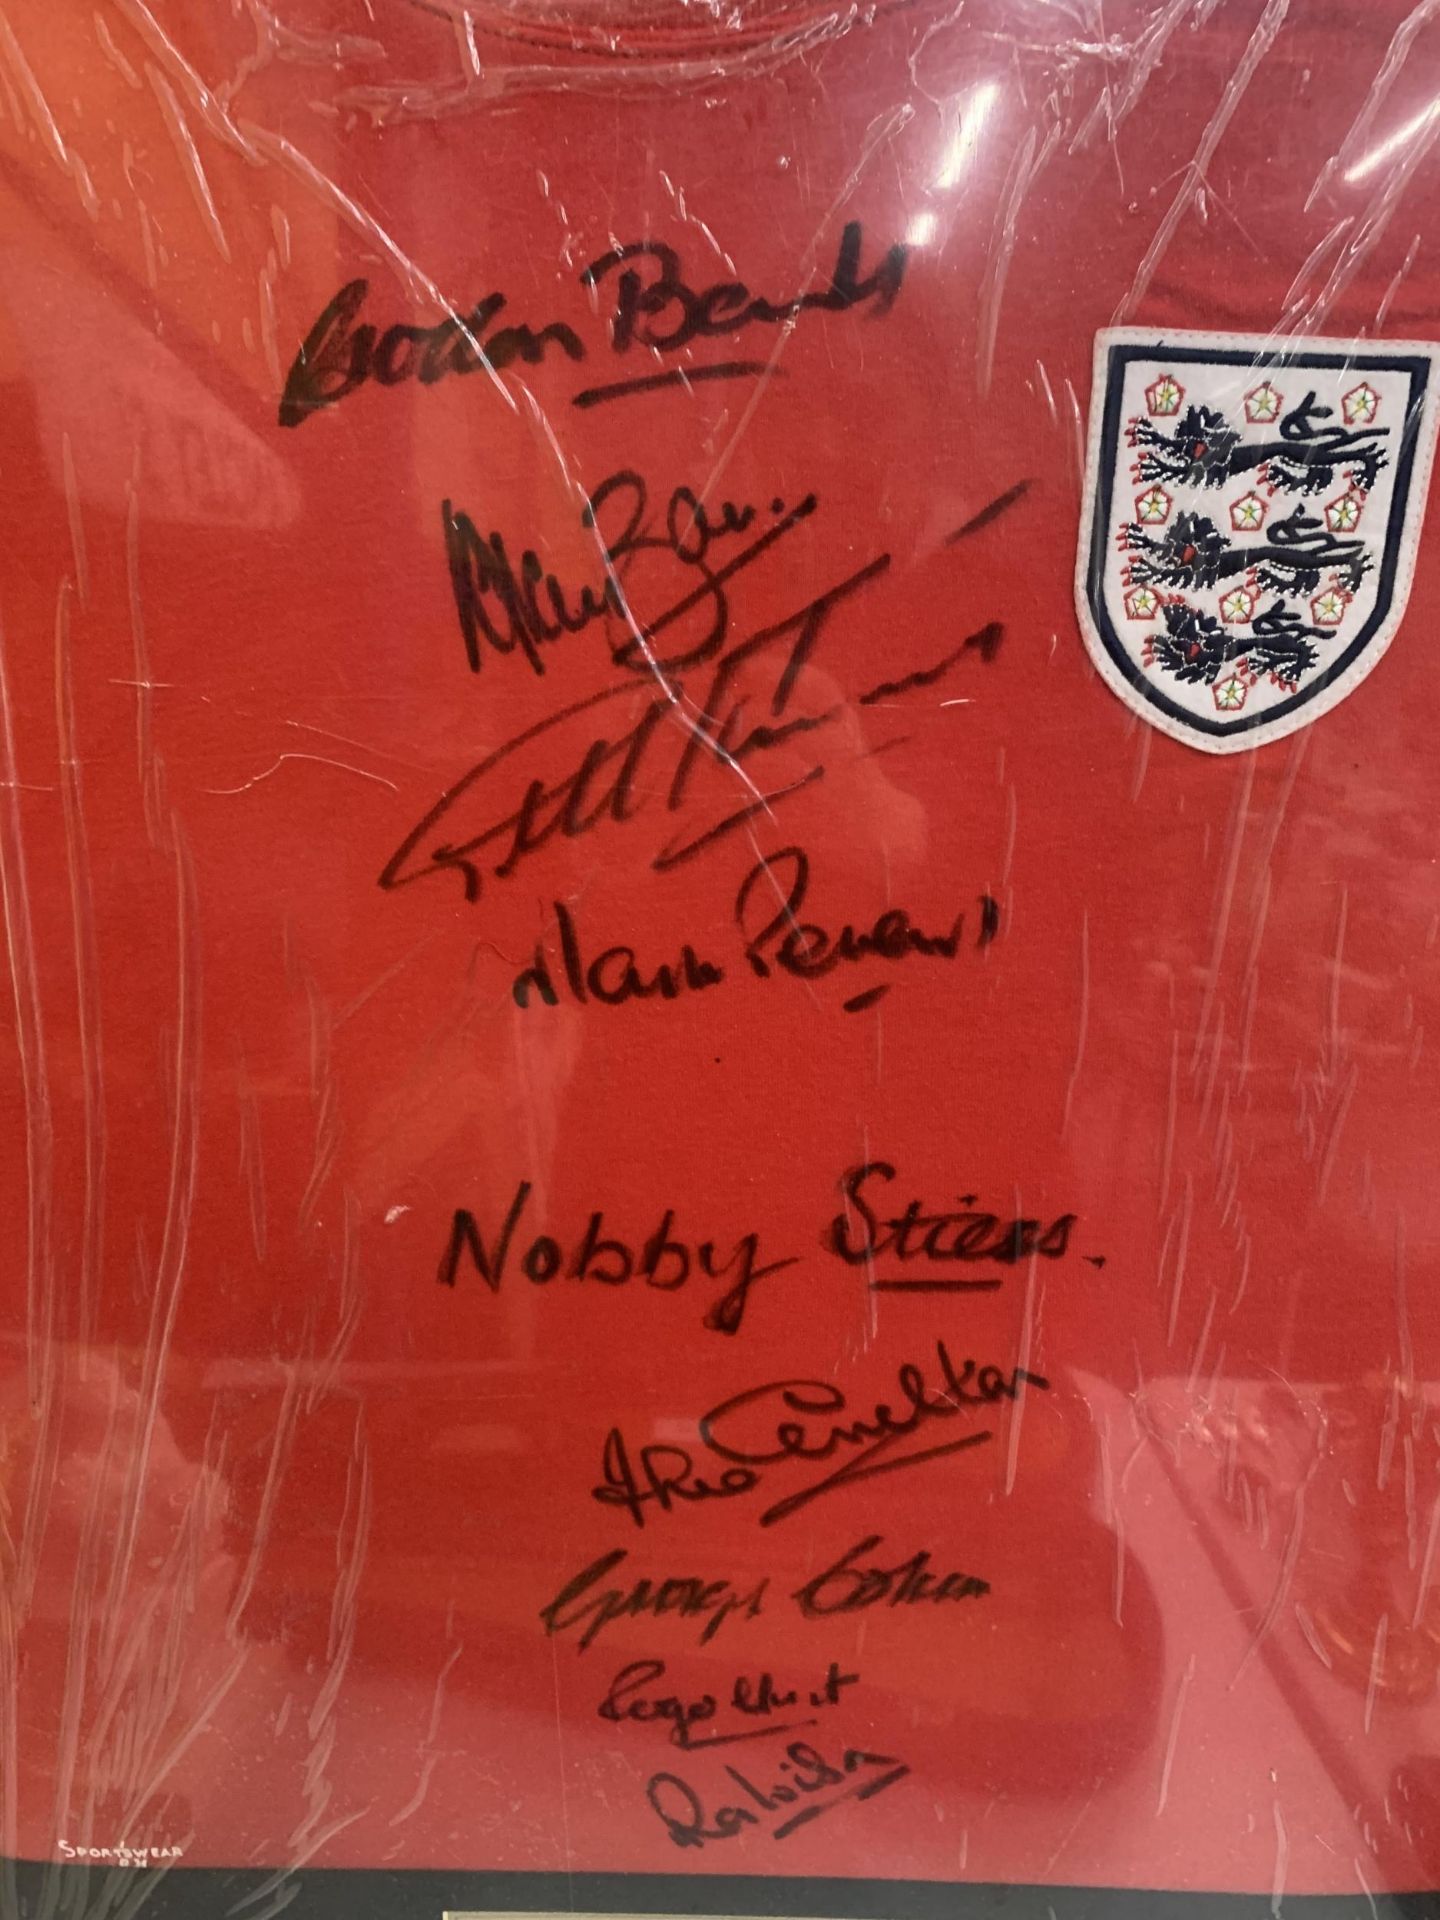 A FRAMED AUTHENTIC 1966 ENGLAND WORLD CUP FOOTBALL SHIRT SIGNED BY GORDON BANKS, GEOFF HURST, JACK - Image 3 of 9